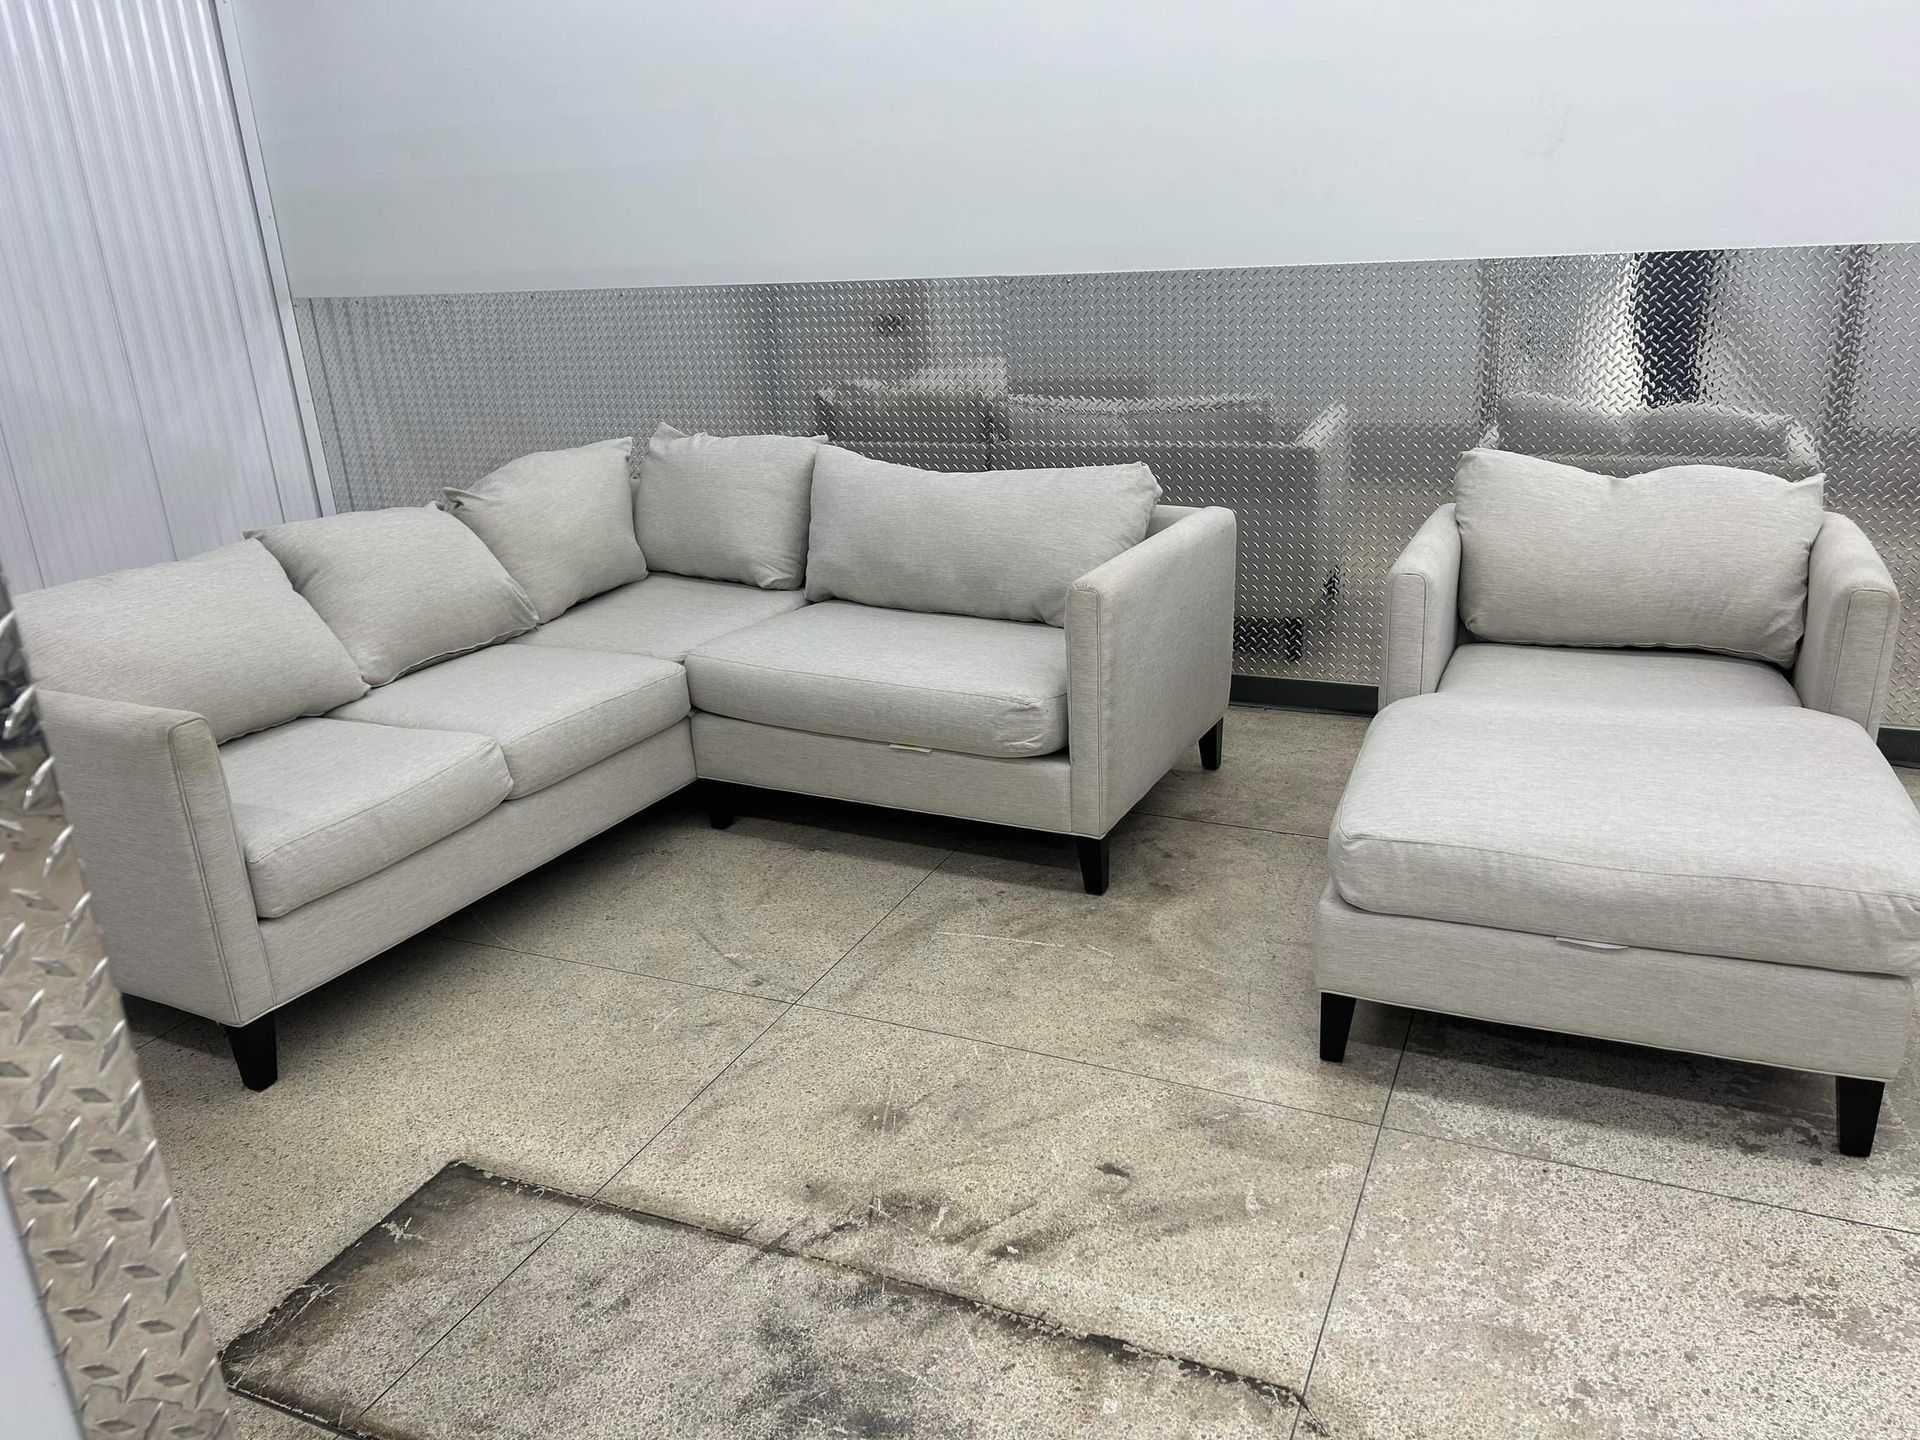 FREE DELIVERY- LIGHT GRAY SECTIONAL W CHAISE 